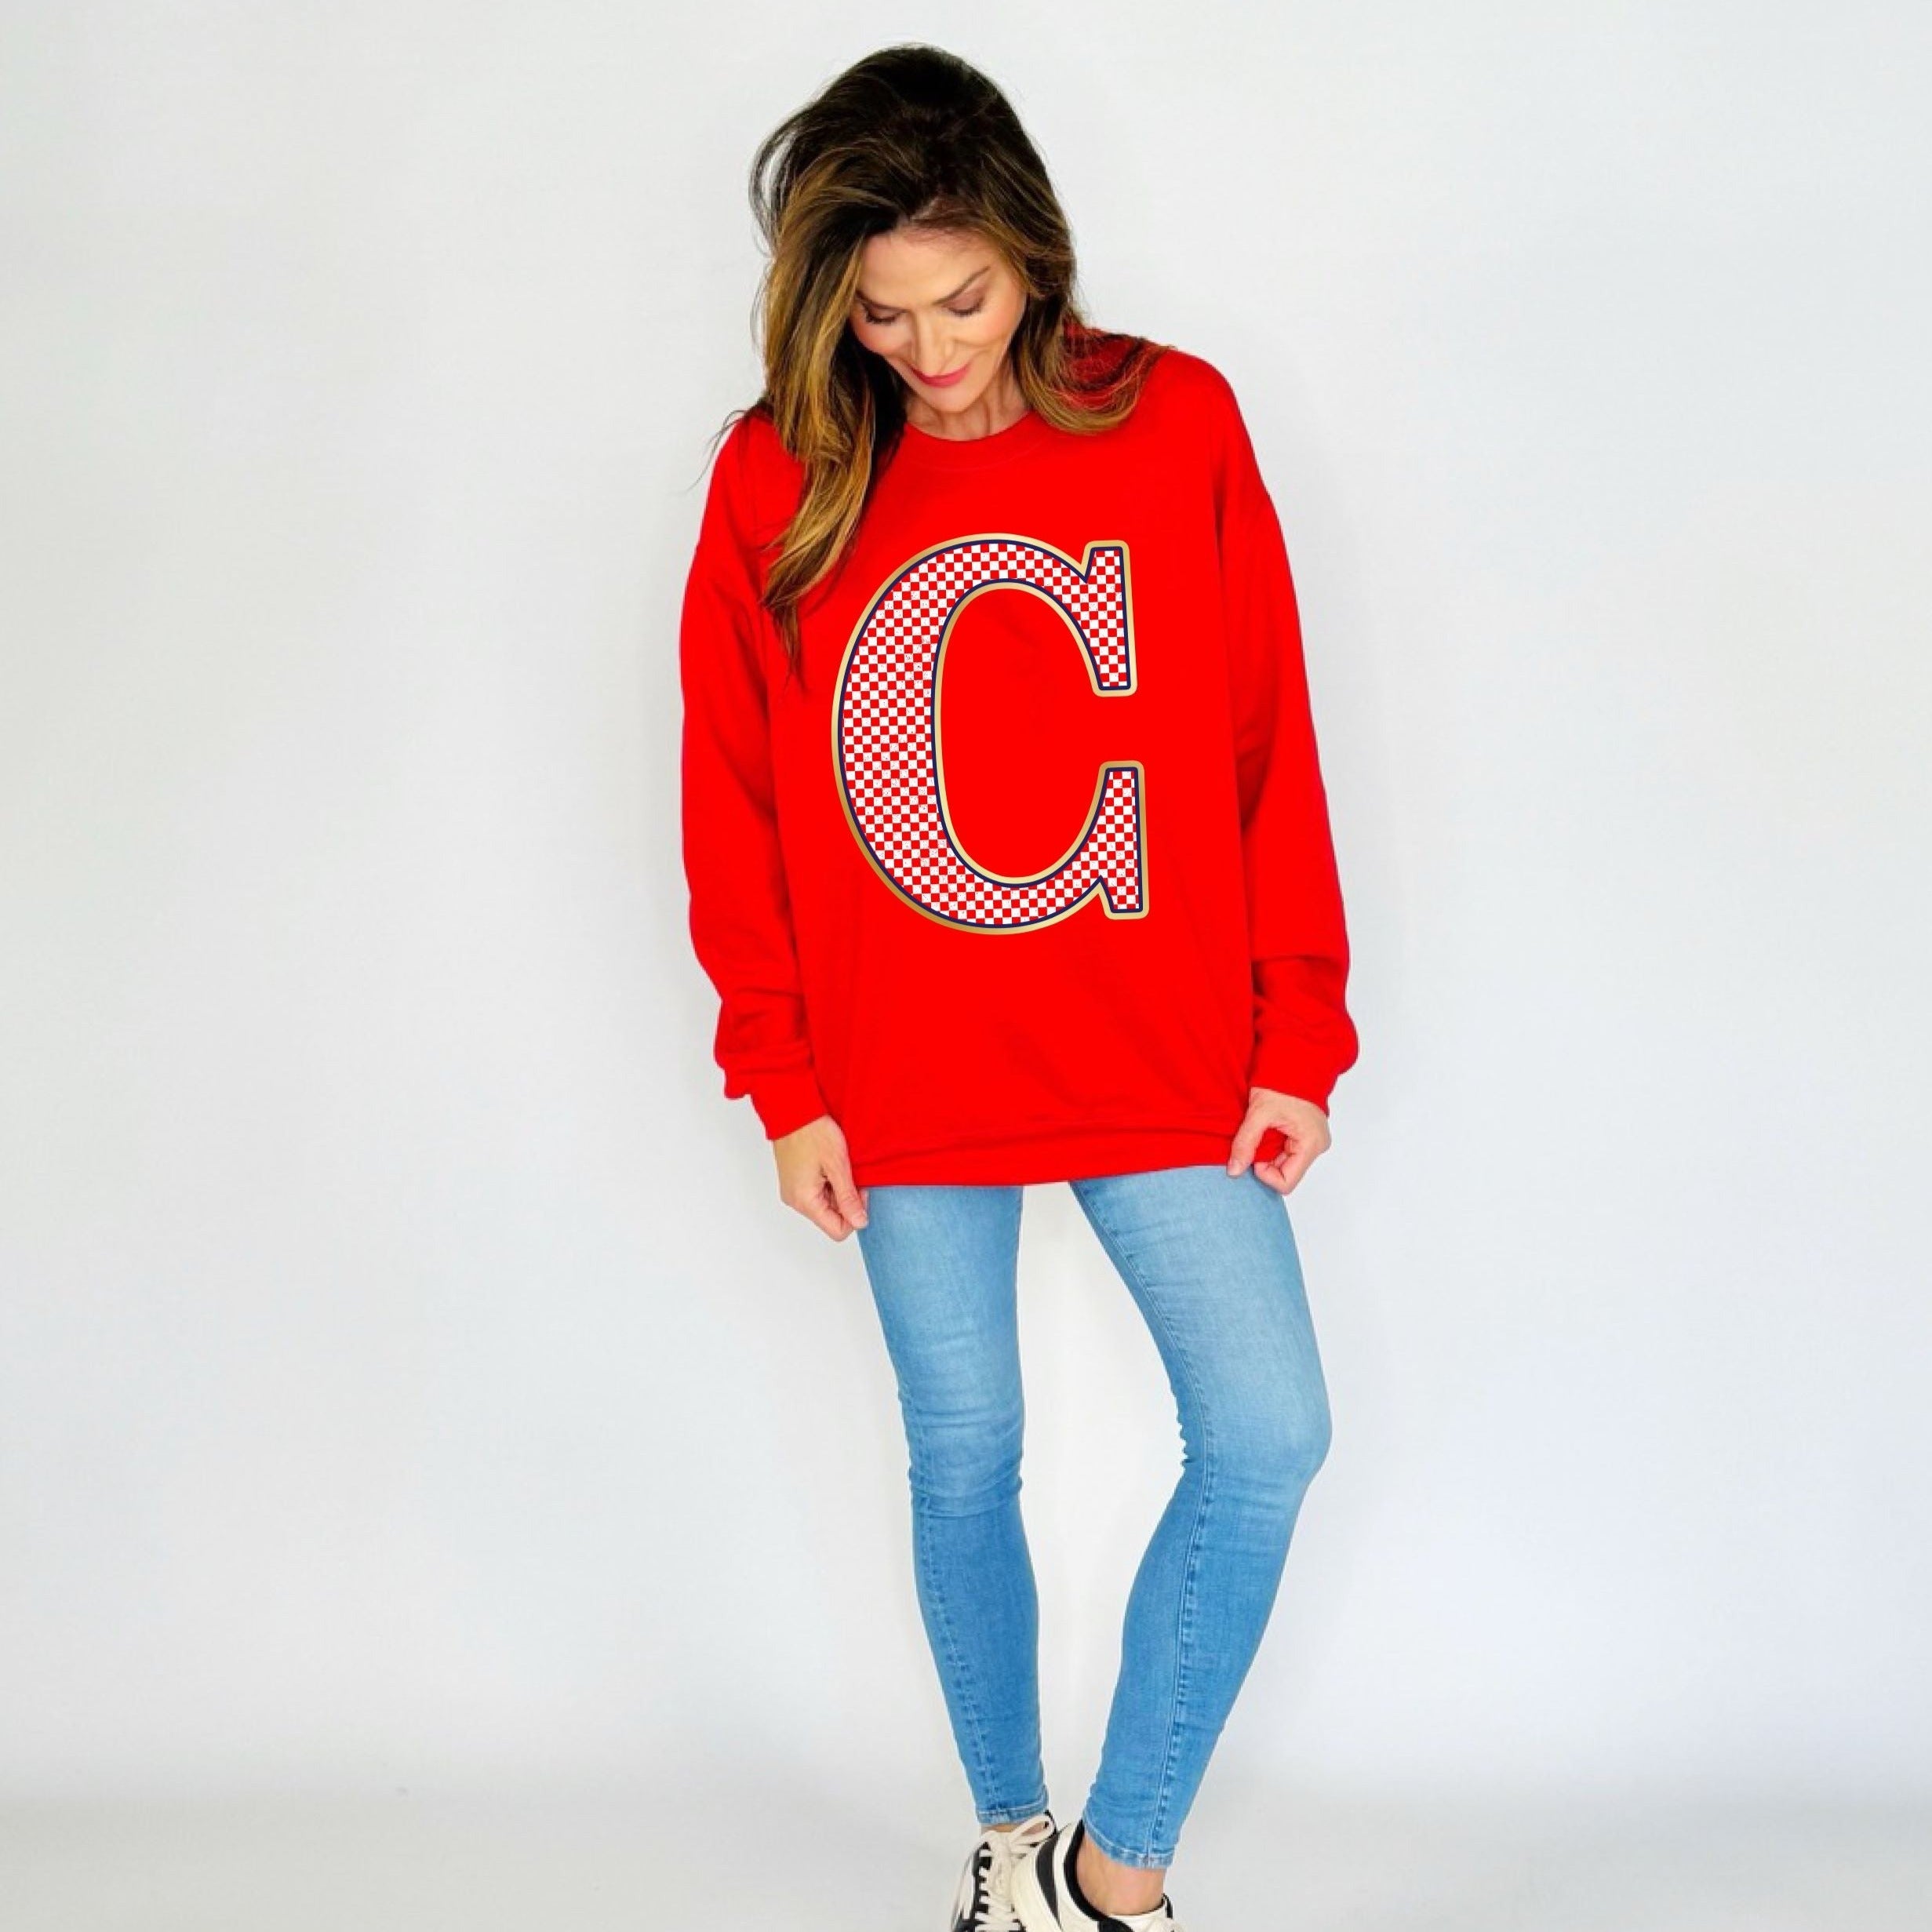 Cleveland Inspired Checkered Youth & Adult Sweatshirt